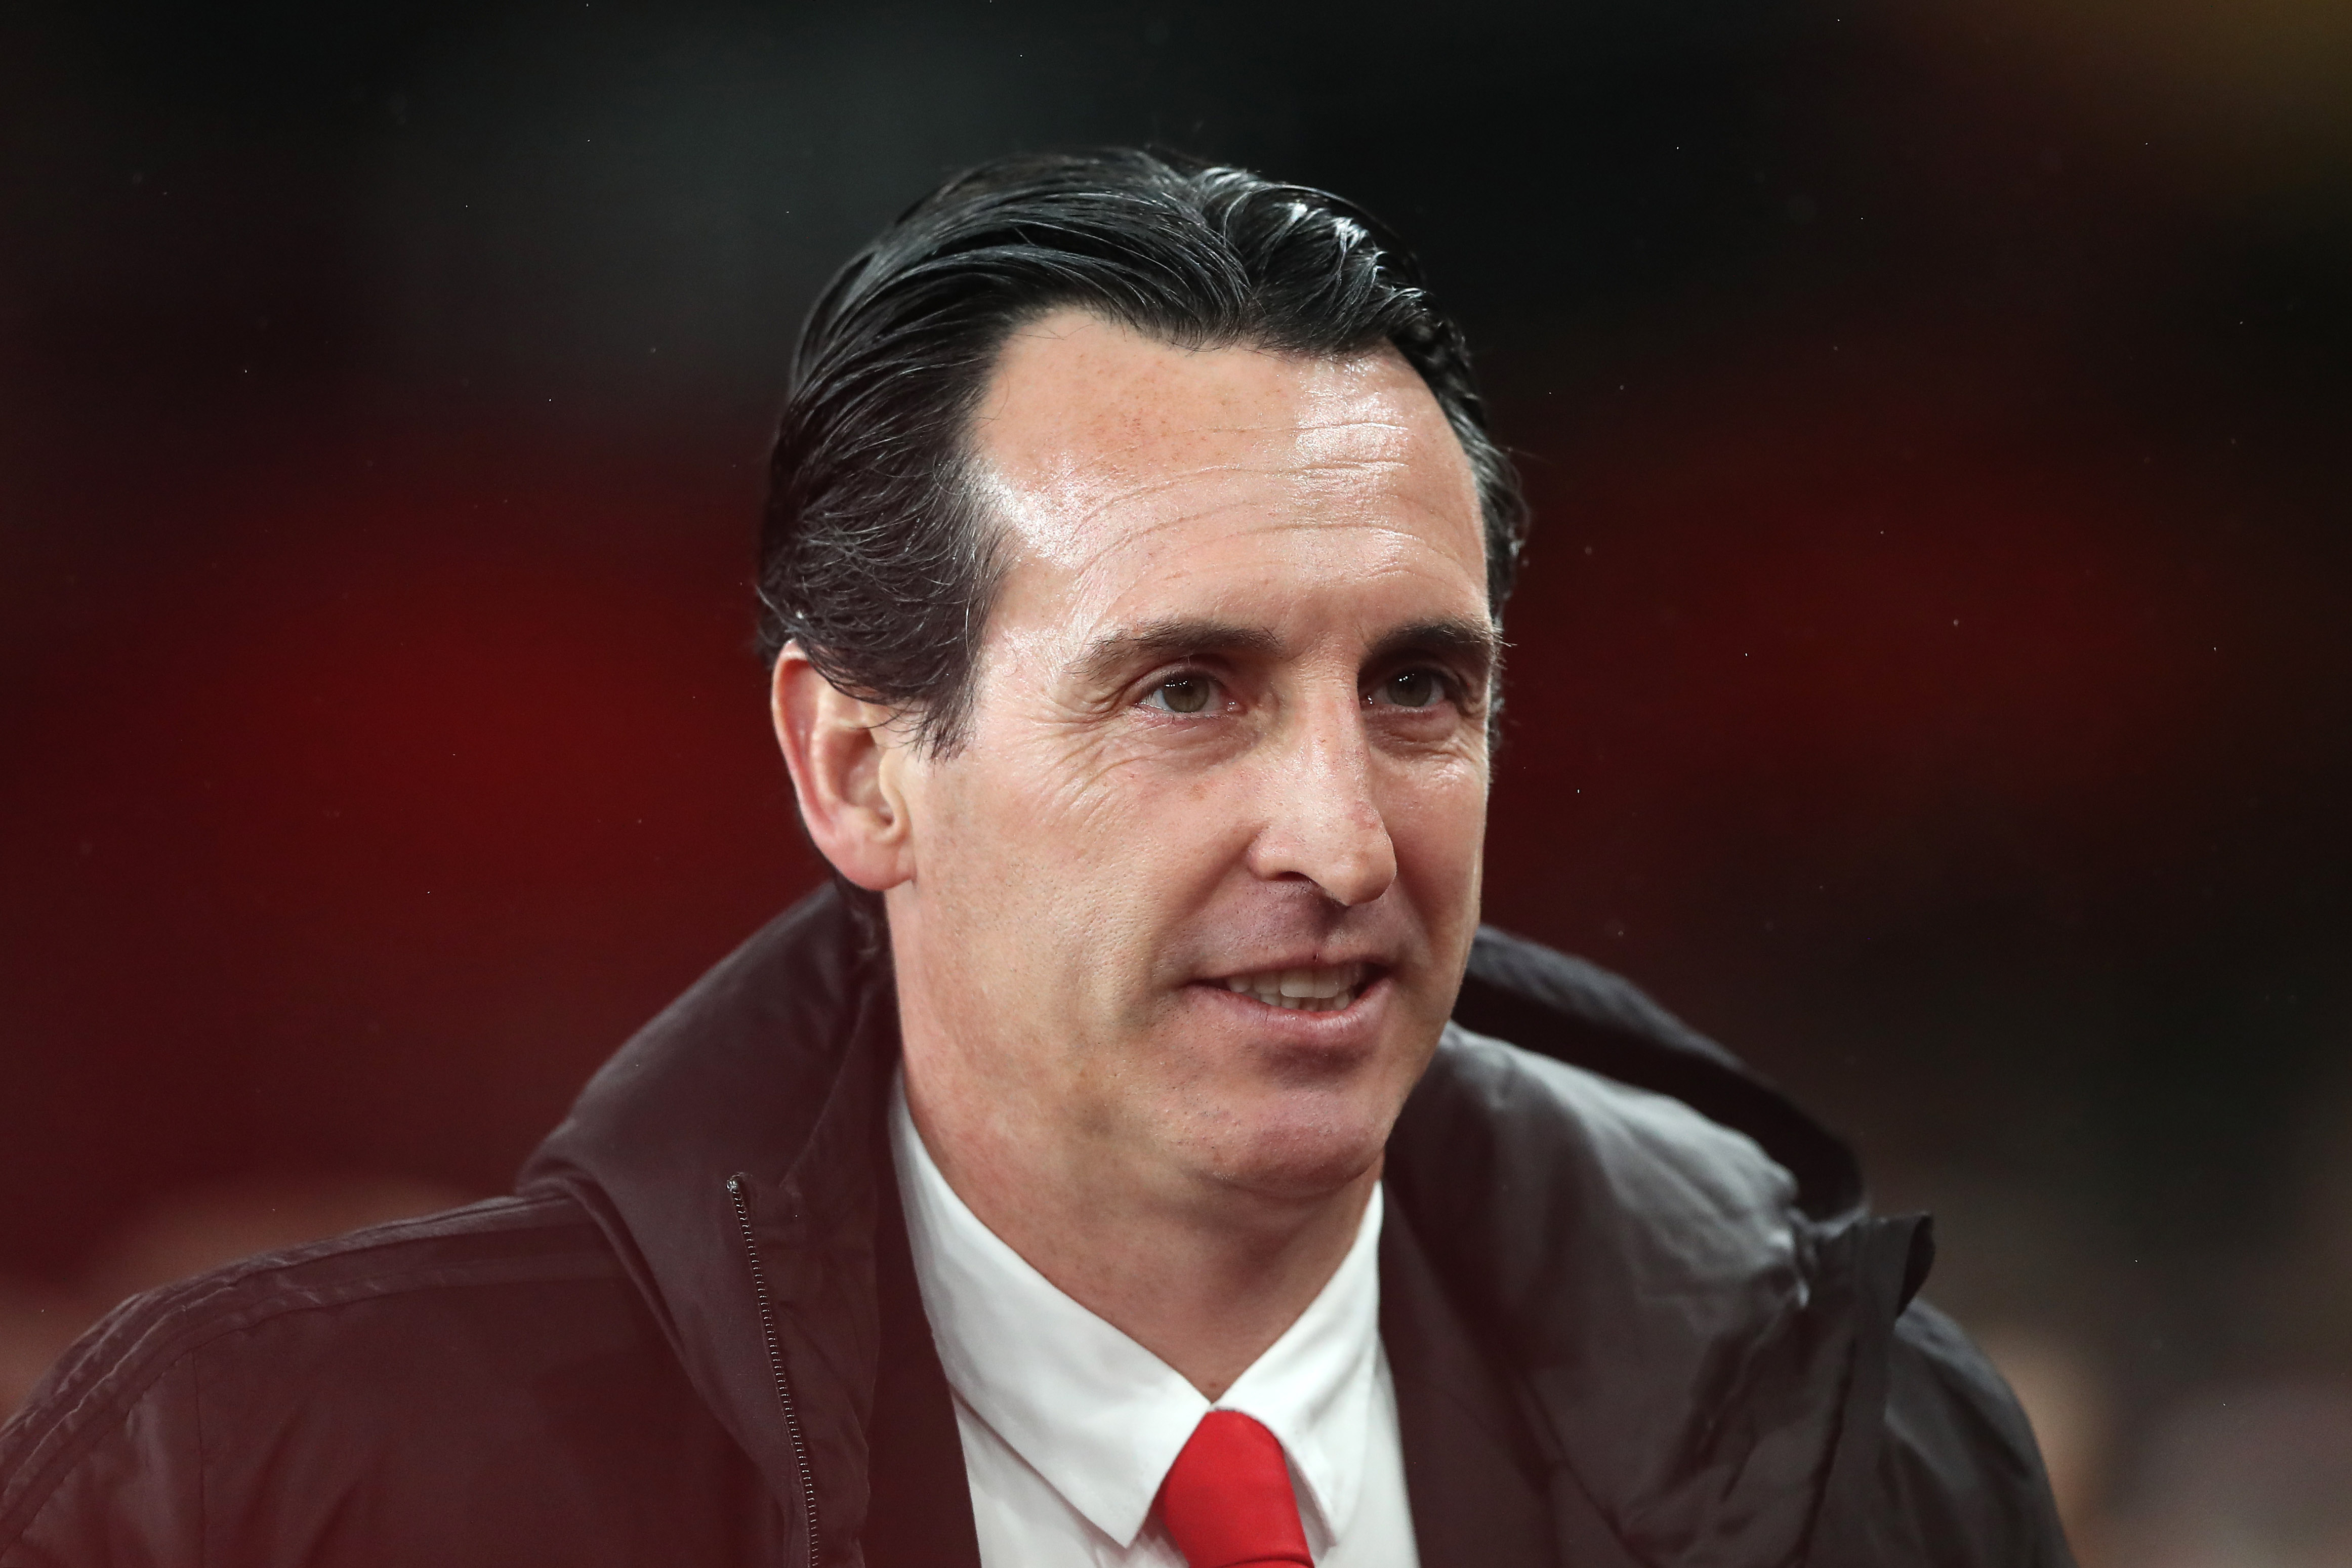 Arsenal vs Southampton: The goal that proved Unai Emery had lost the team - REWIND